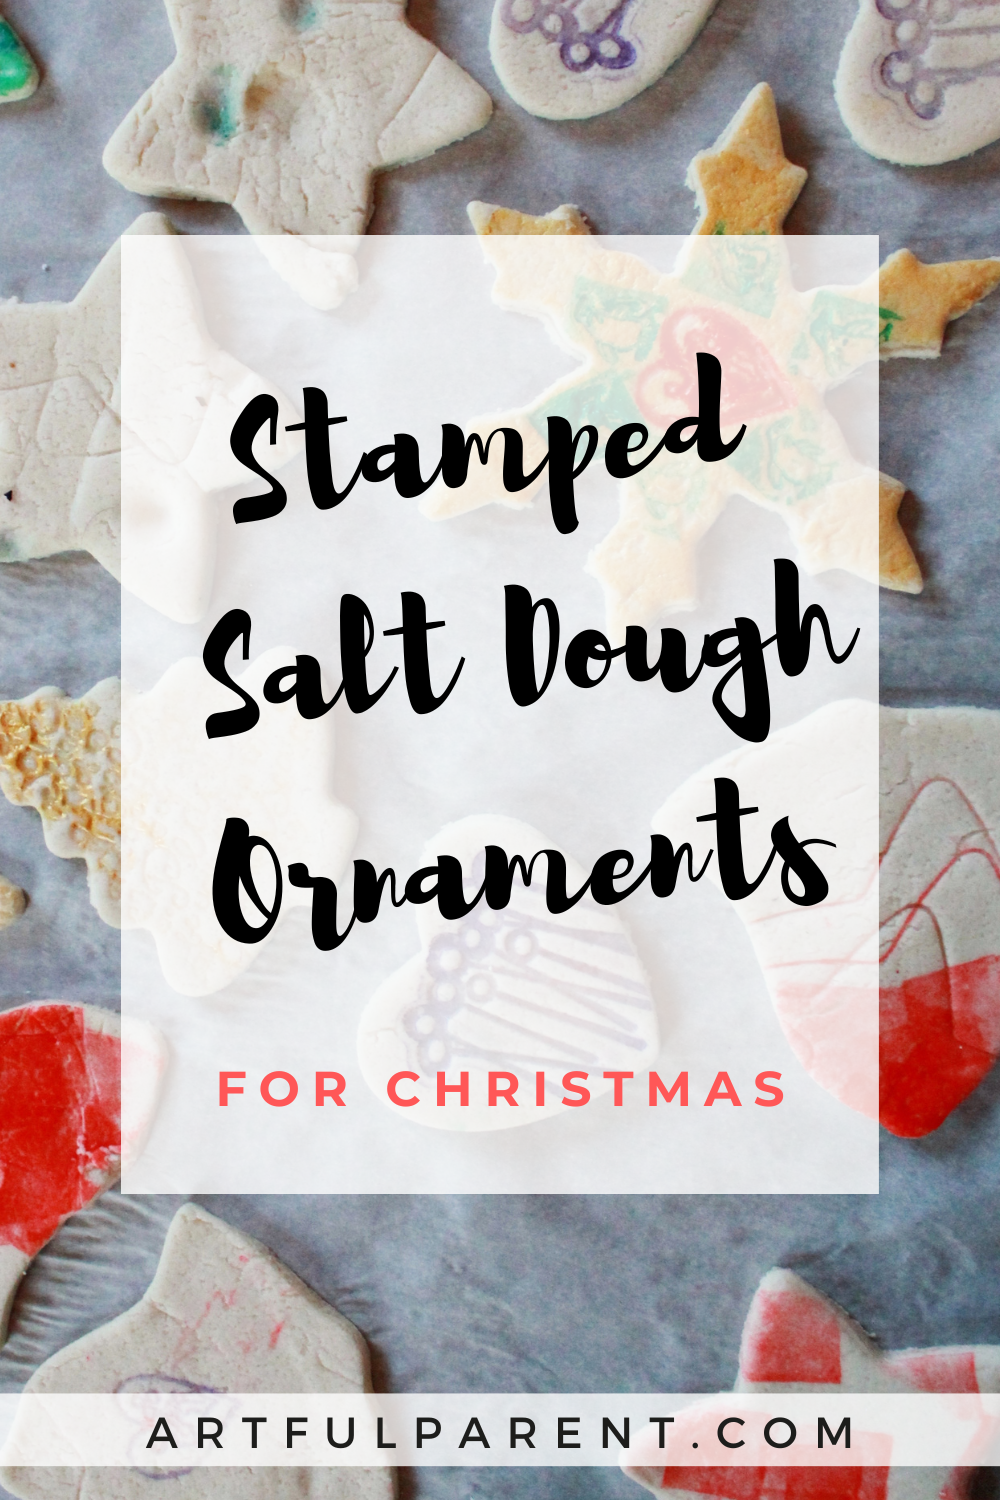 How to Make Stamped Salt Dough Ornaments